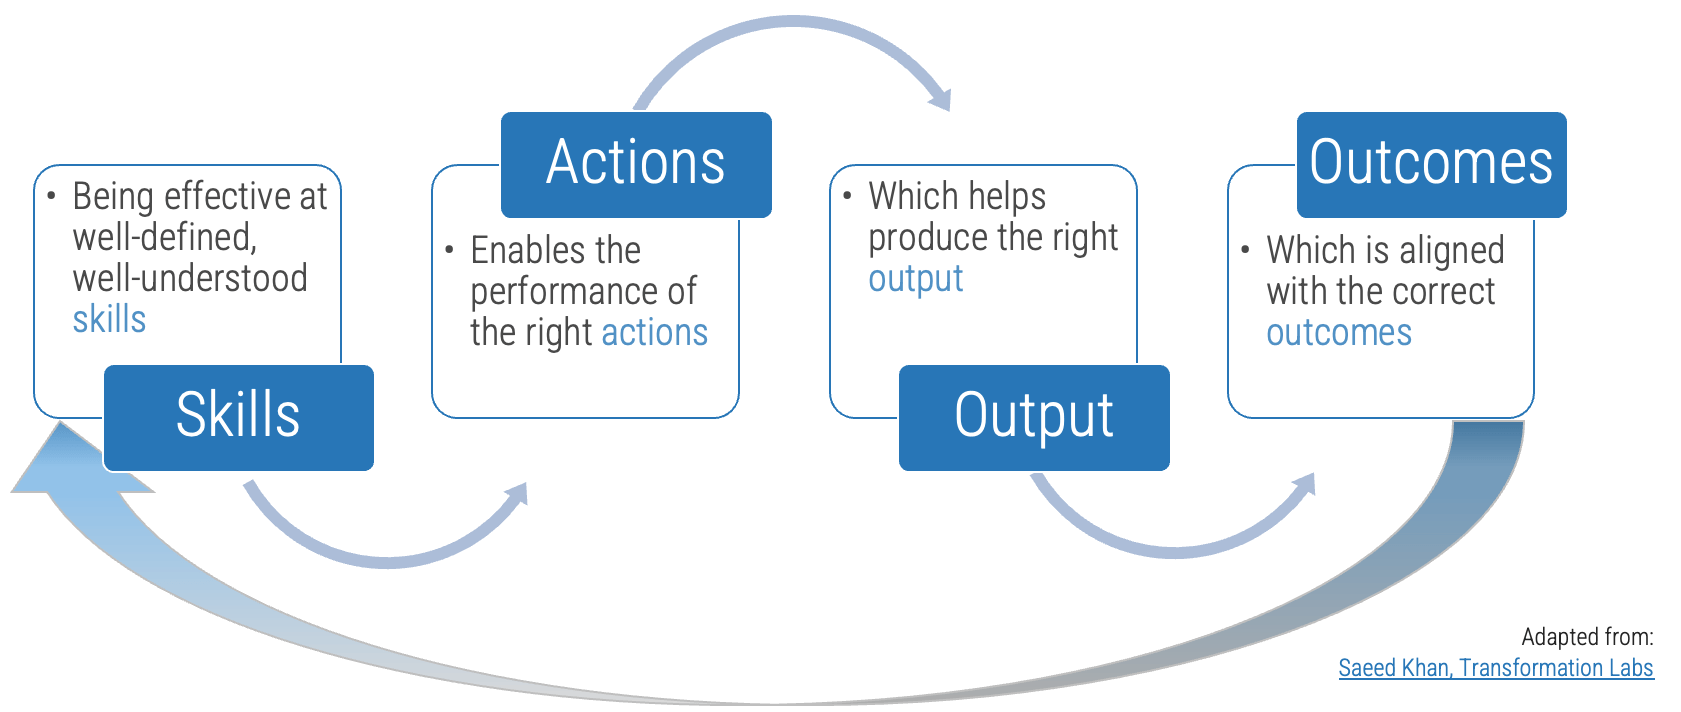 Skills, actions, output and outcomes